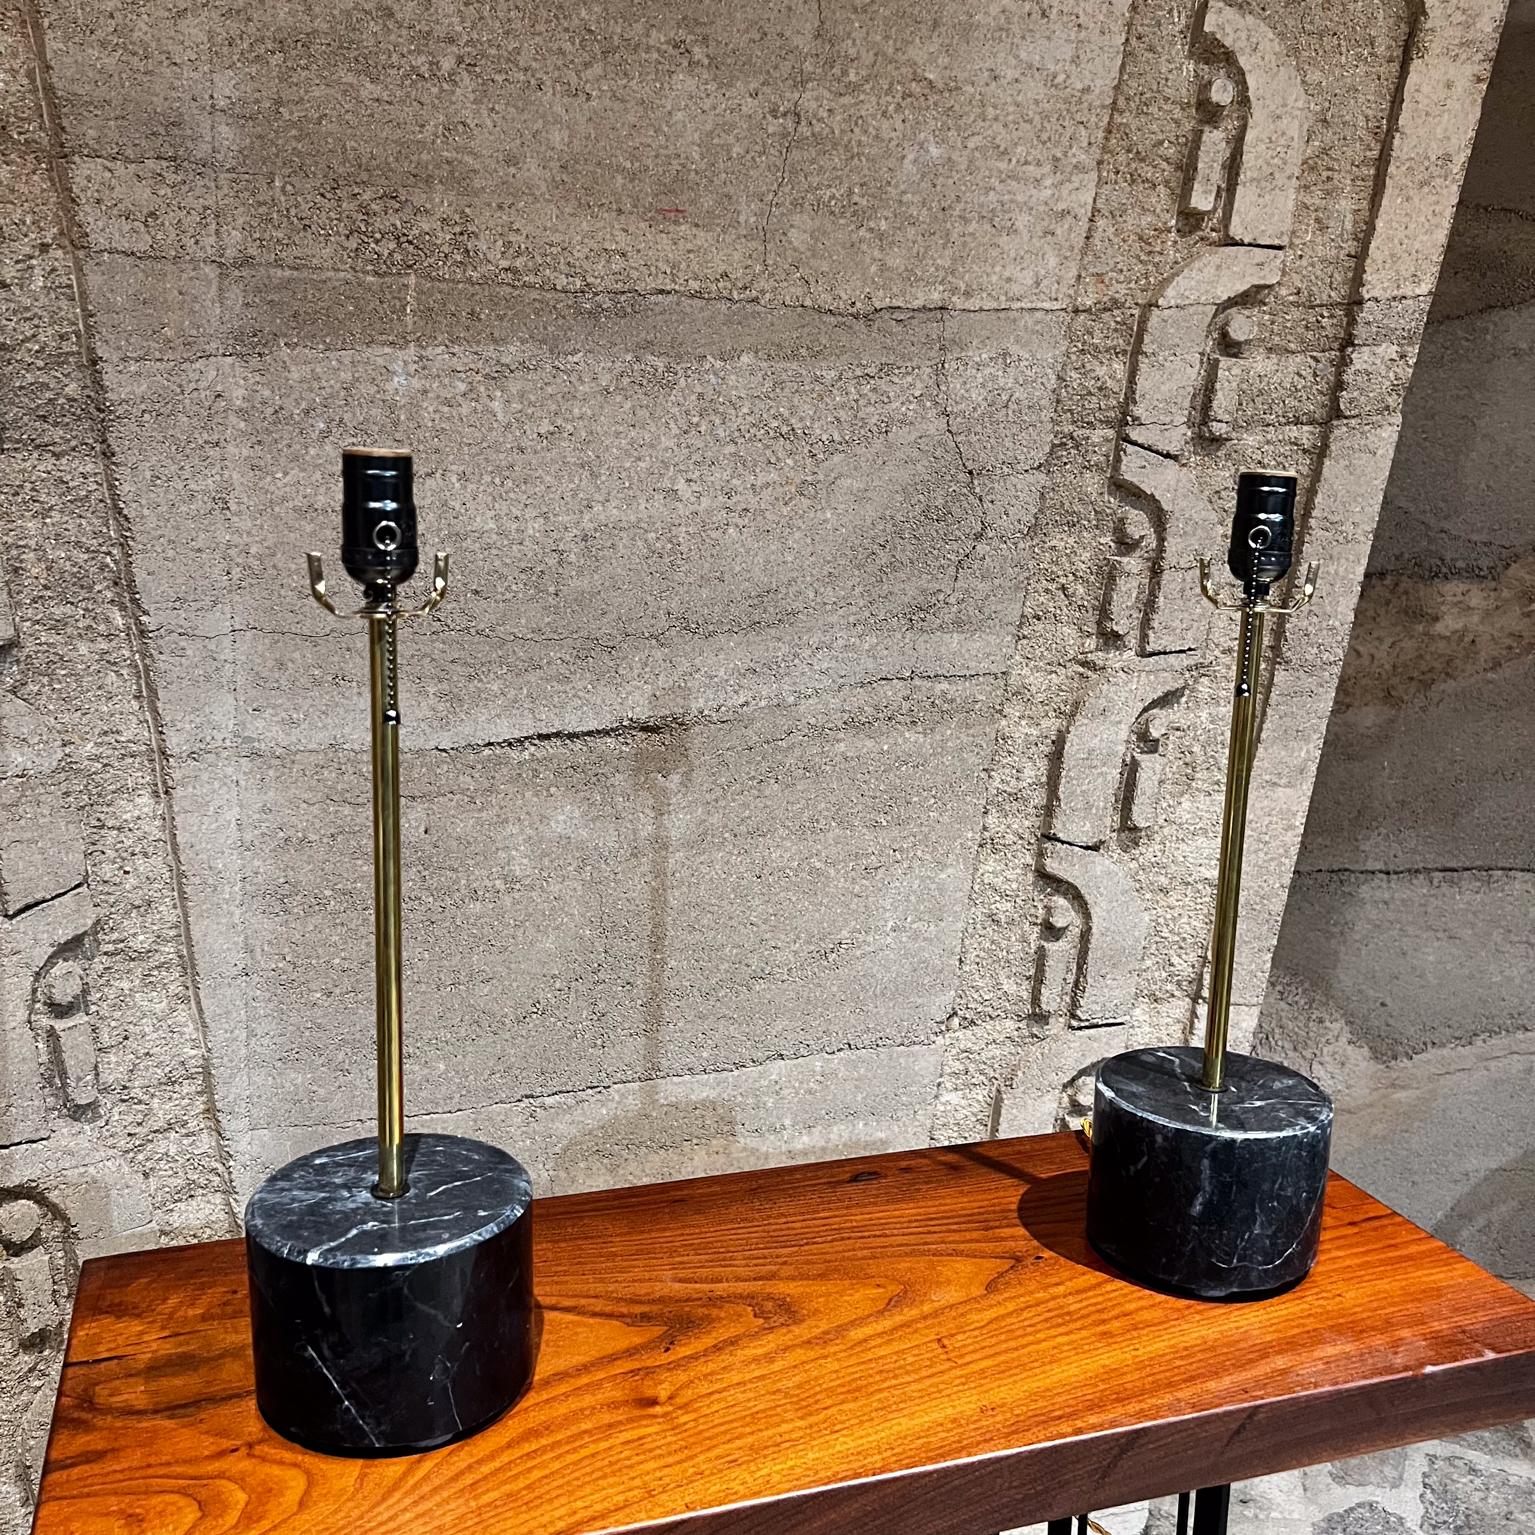 Contemporary Modern Polished Black Marble Table Lamps by Pablo Romo
18.75 h x 6.5 diameter
Original condition.
New wiring tested and working.
New limited production 1-1
No shades are included.
Review all images.